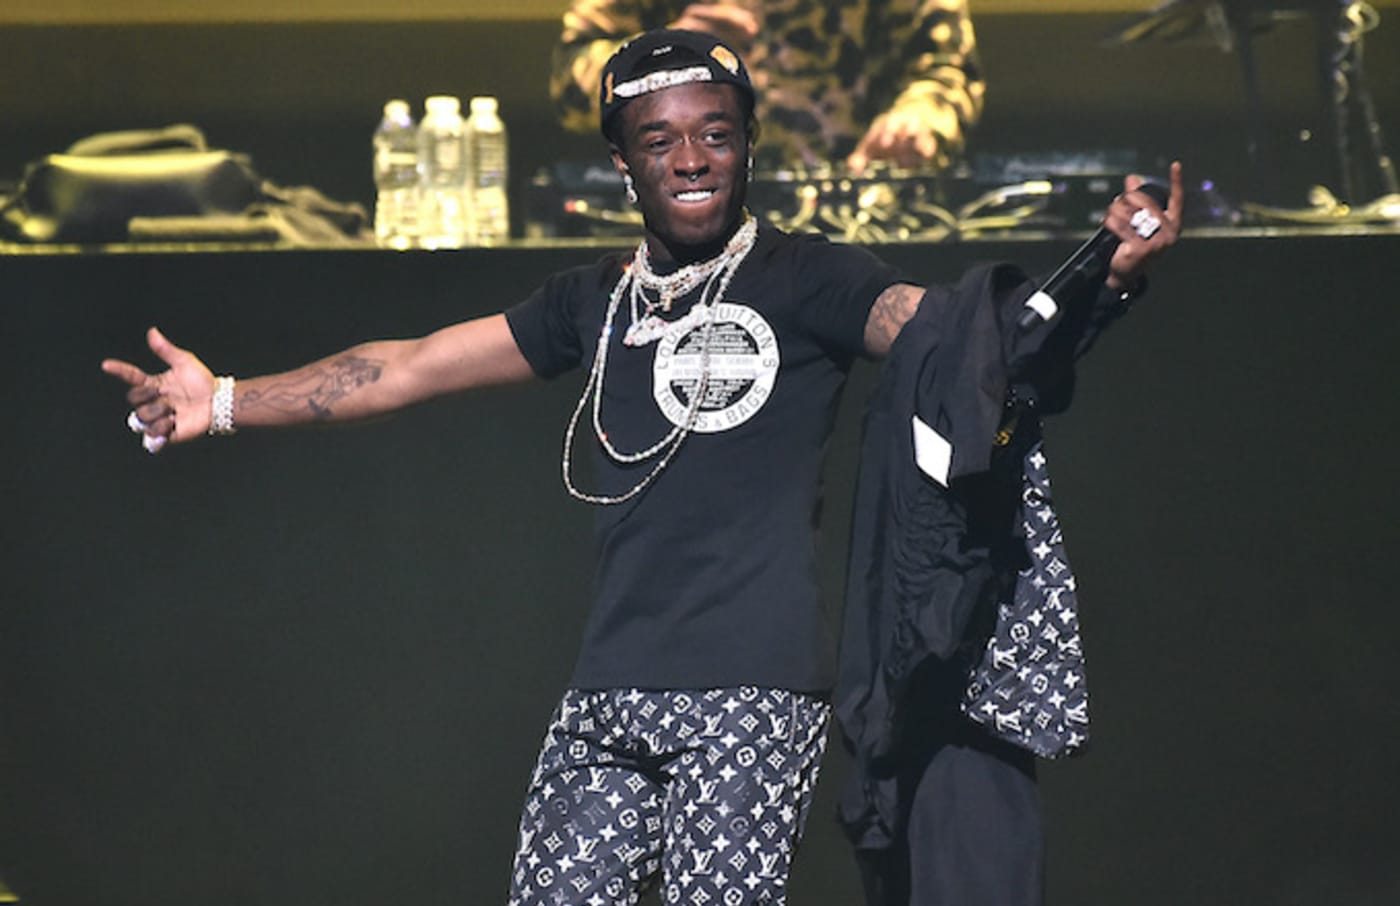 Lil Uzi Vert performs during the TIDAL's 5th Annual TIDAL X Benefit Concert.